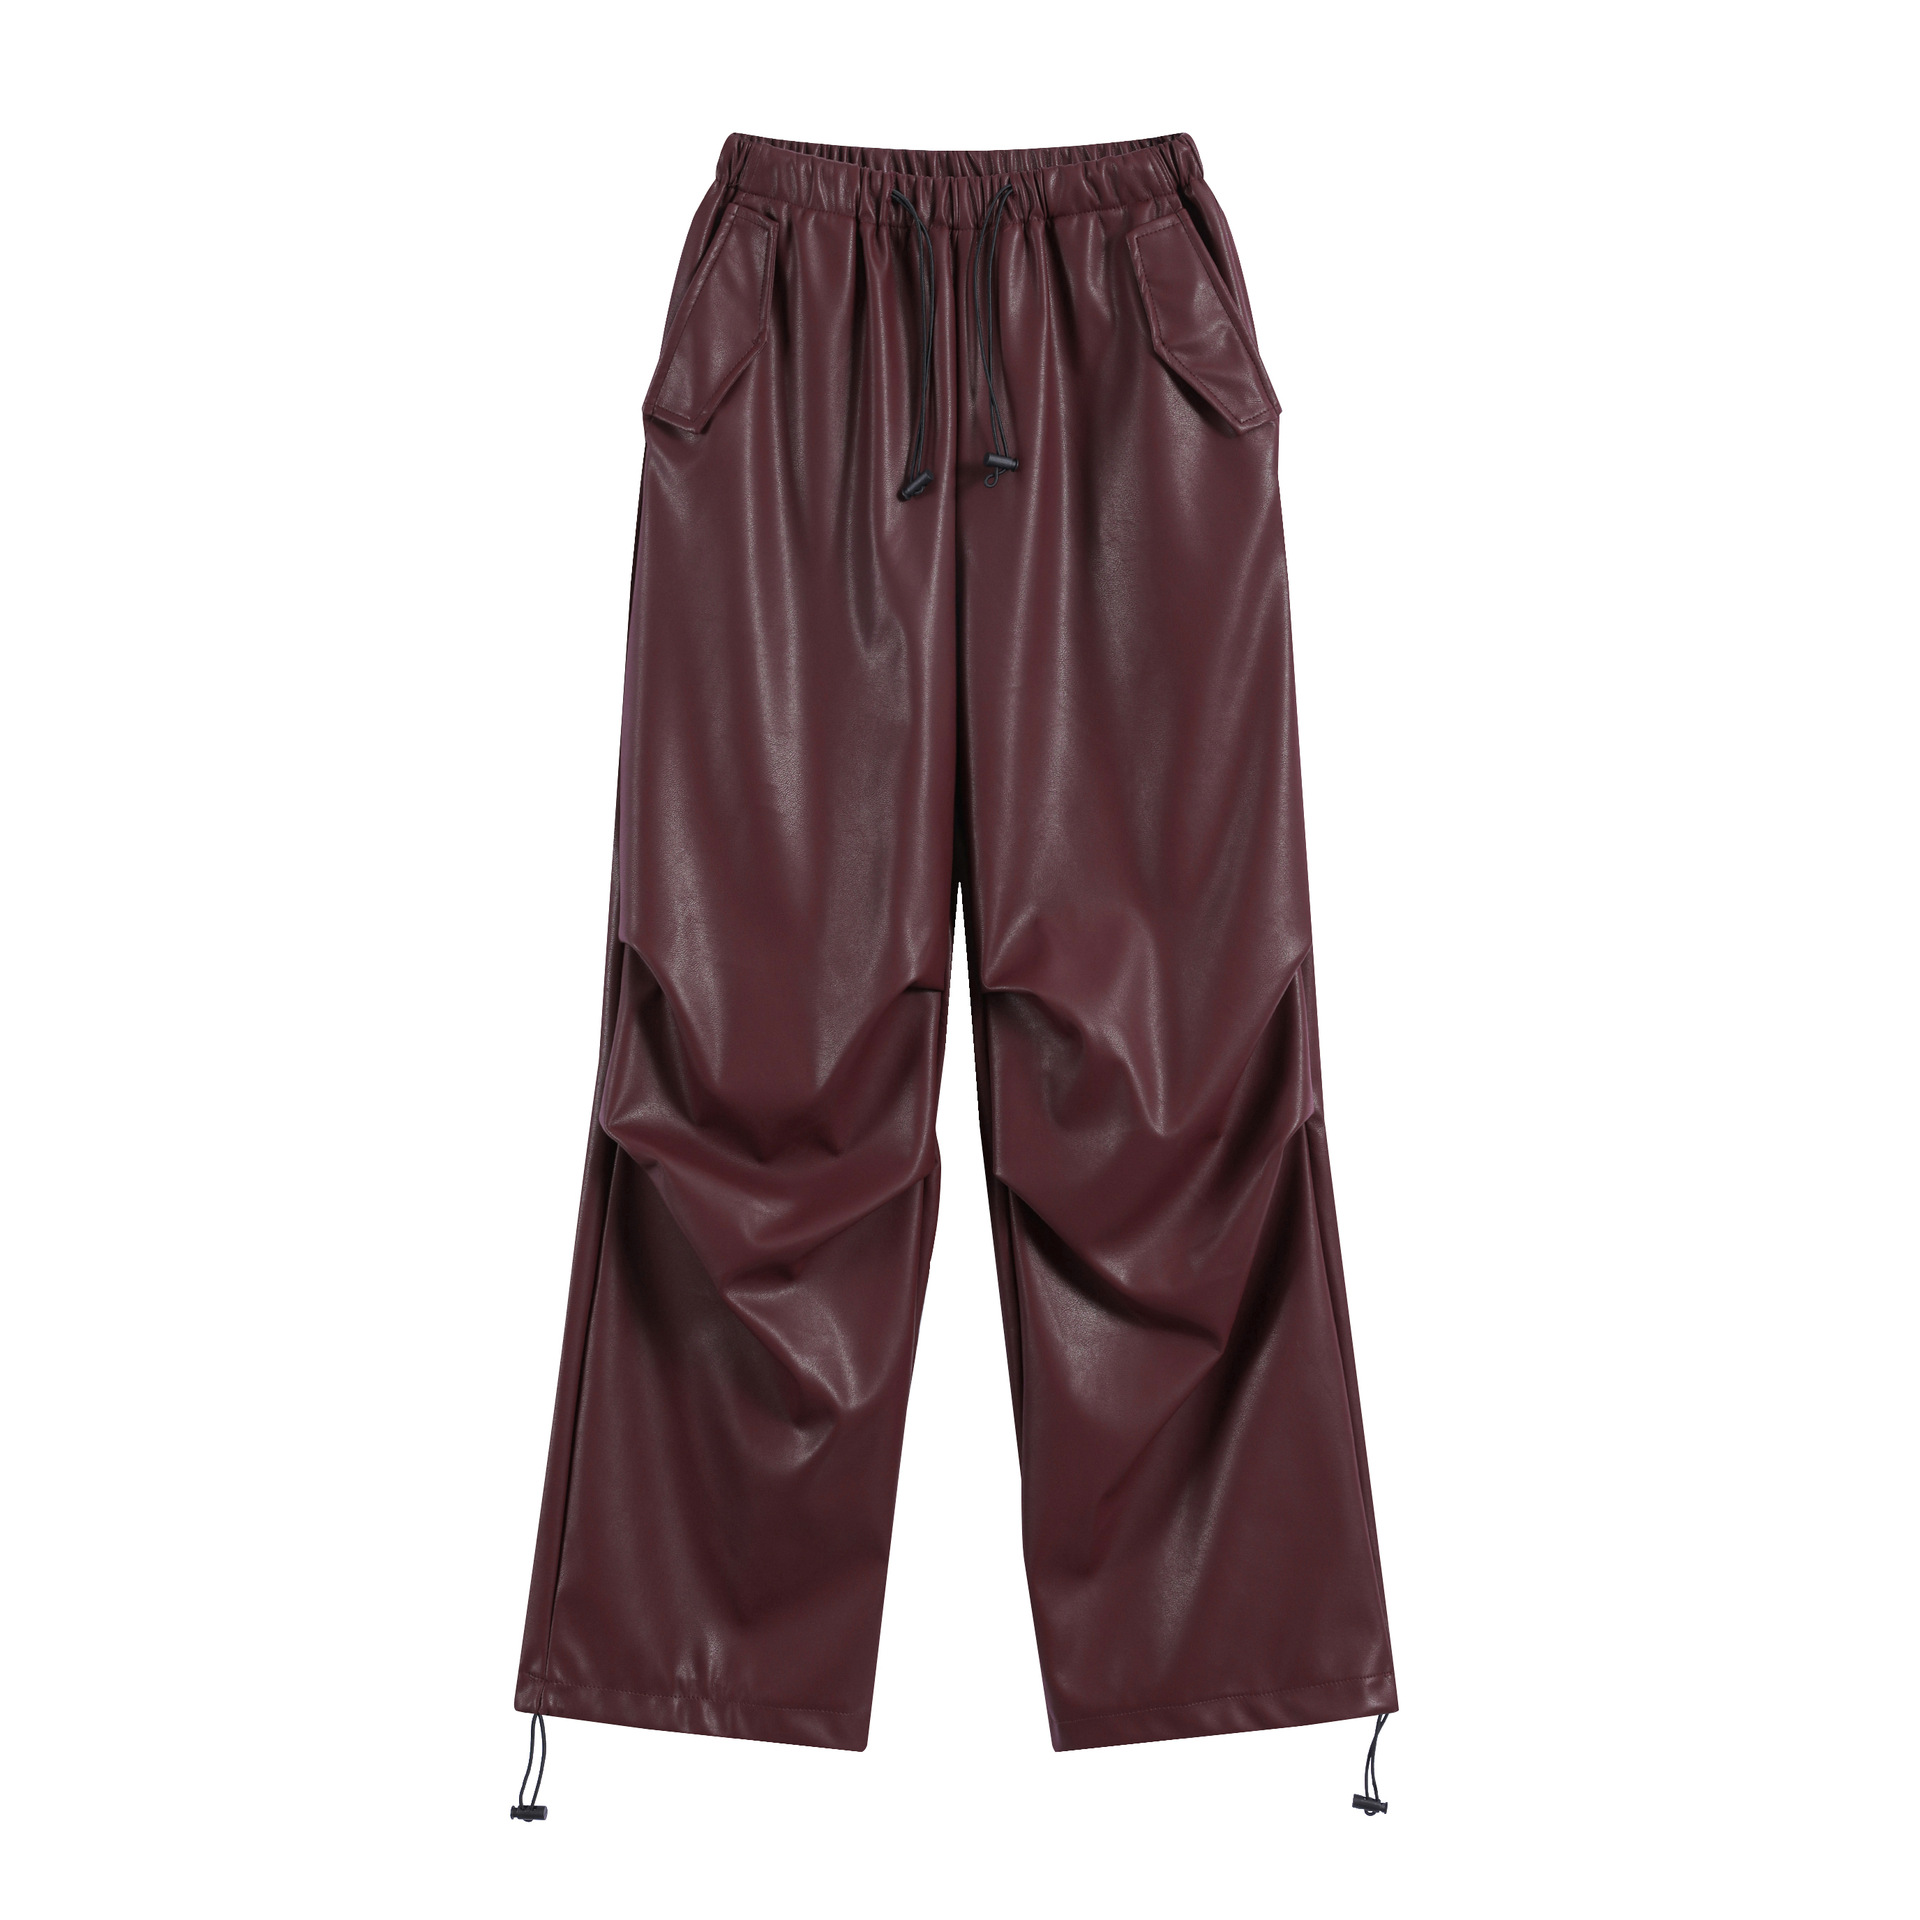 Y2K High Street Motorcycle Style Leather Pants